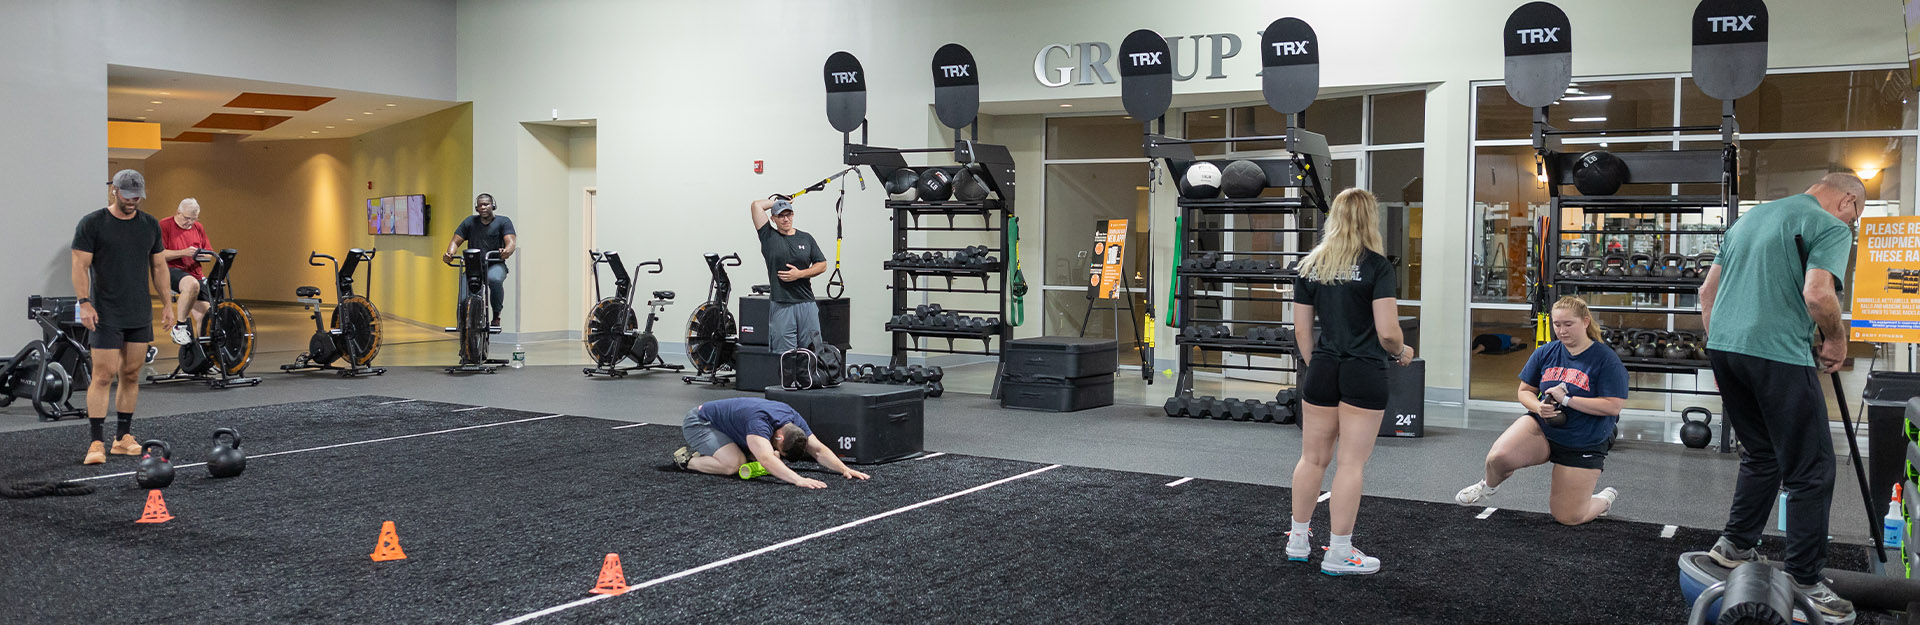 people using functional training equipment in a modern gym